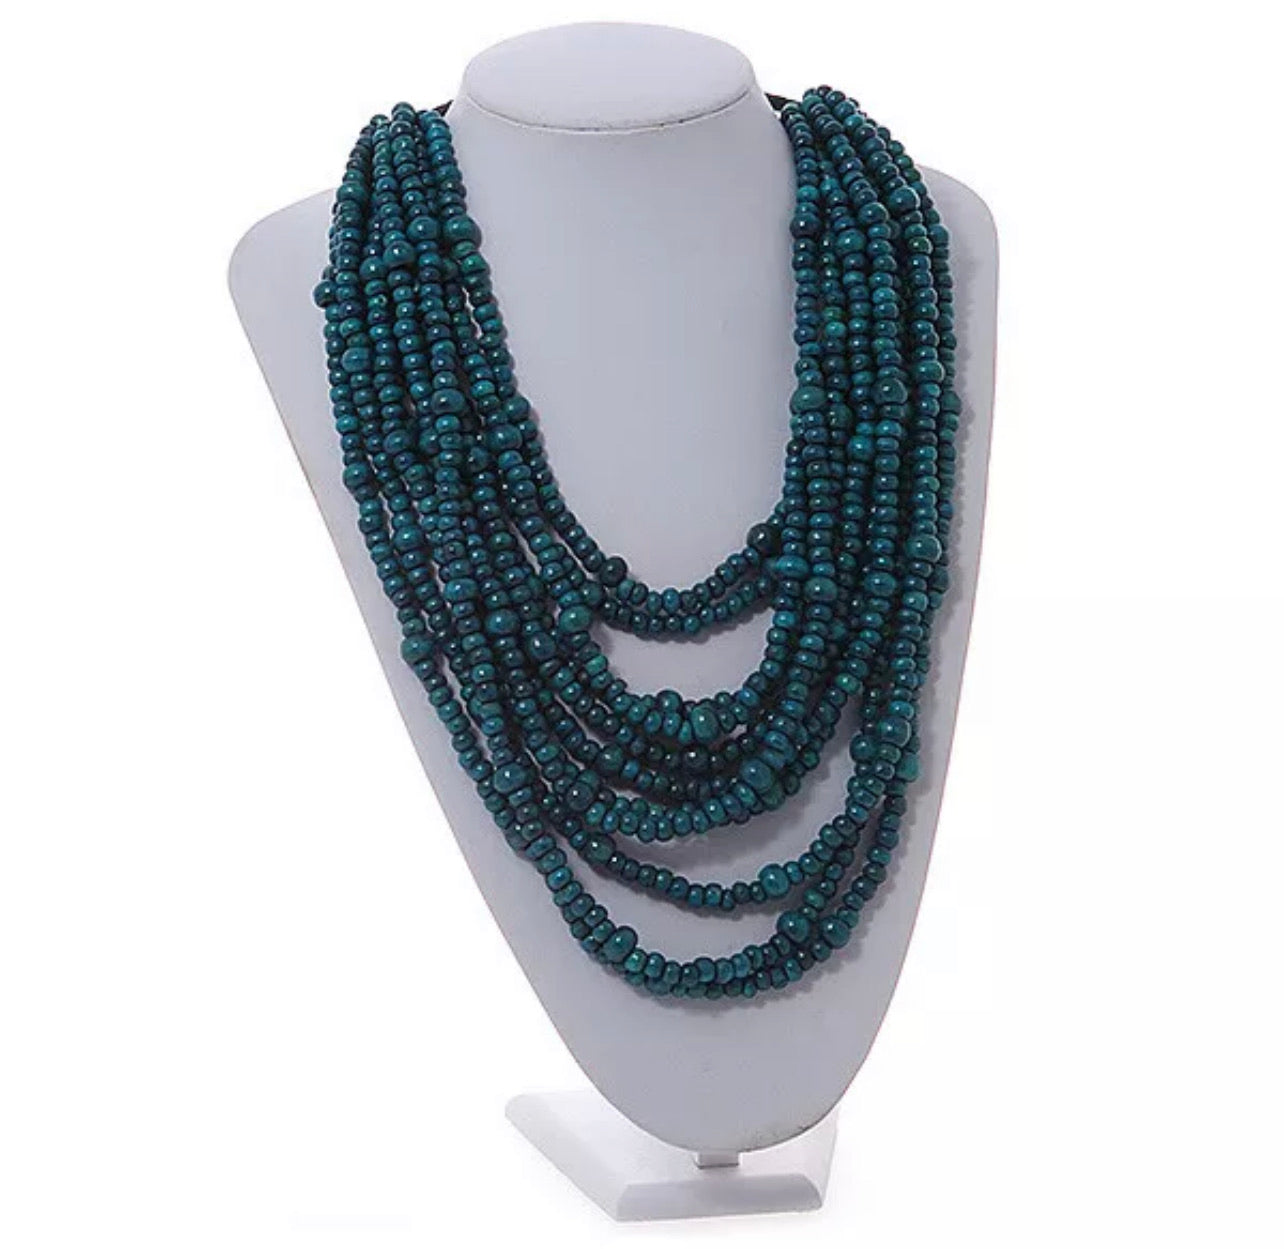 Multistrand Wooden Bead Necklace In Teal